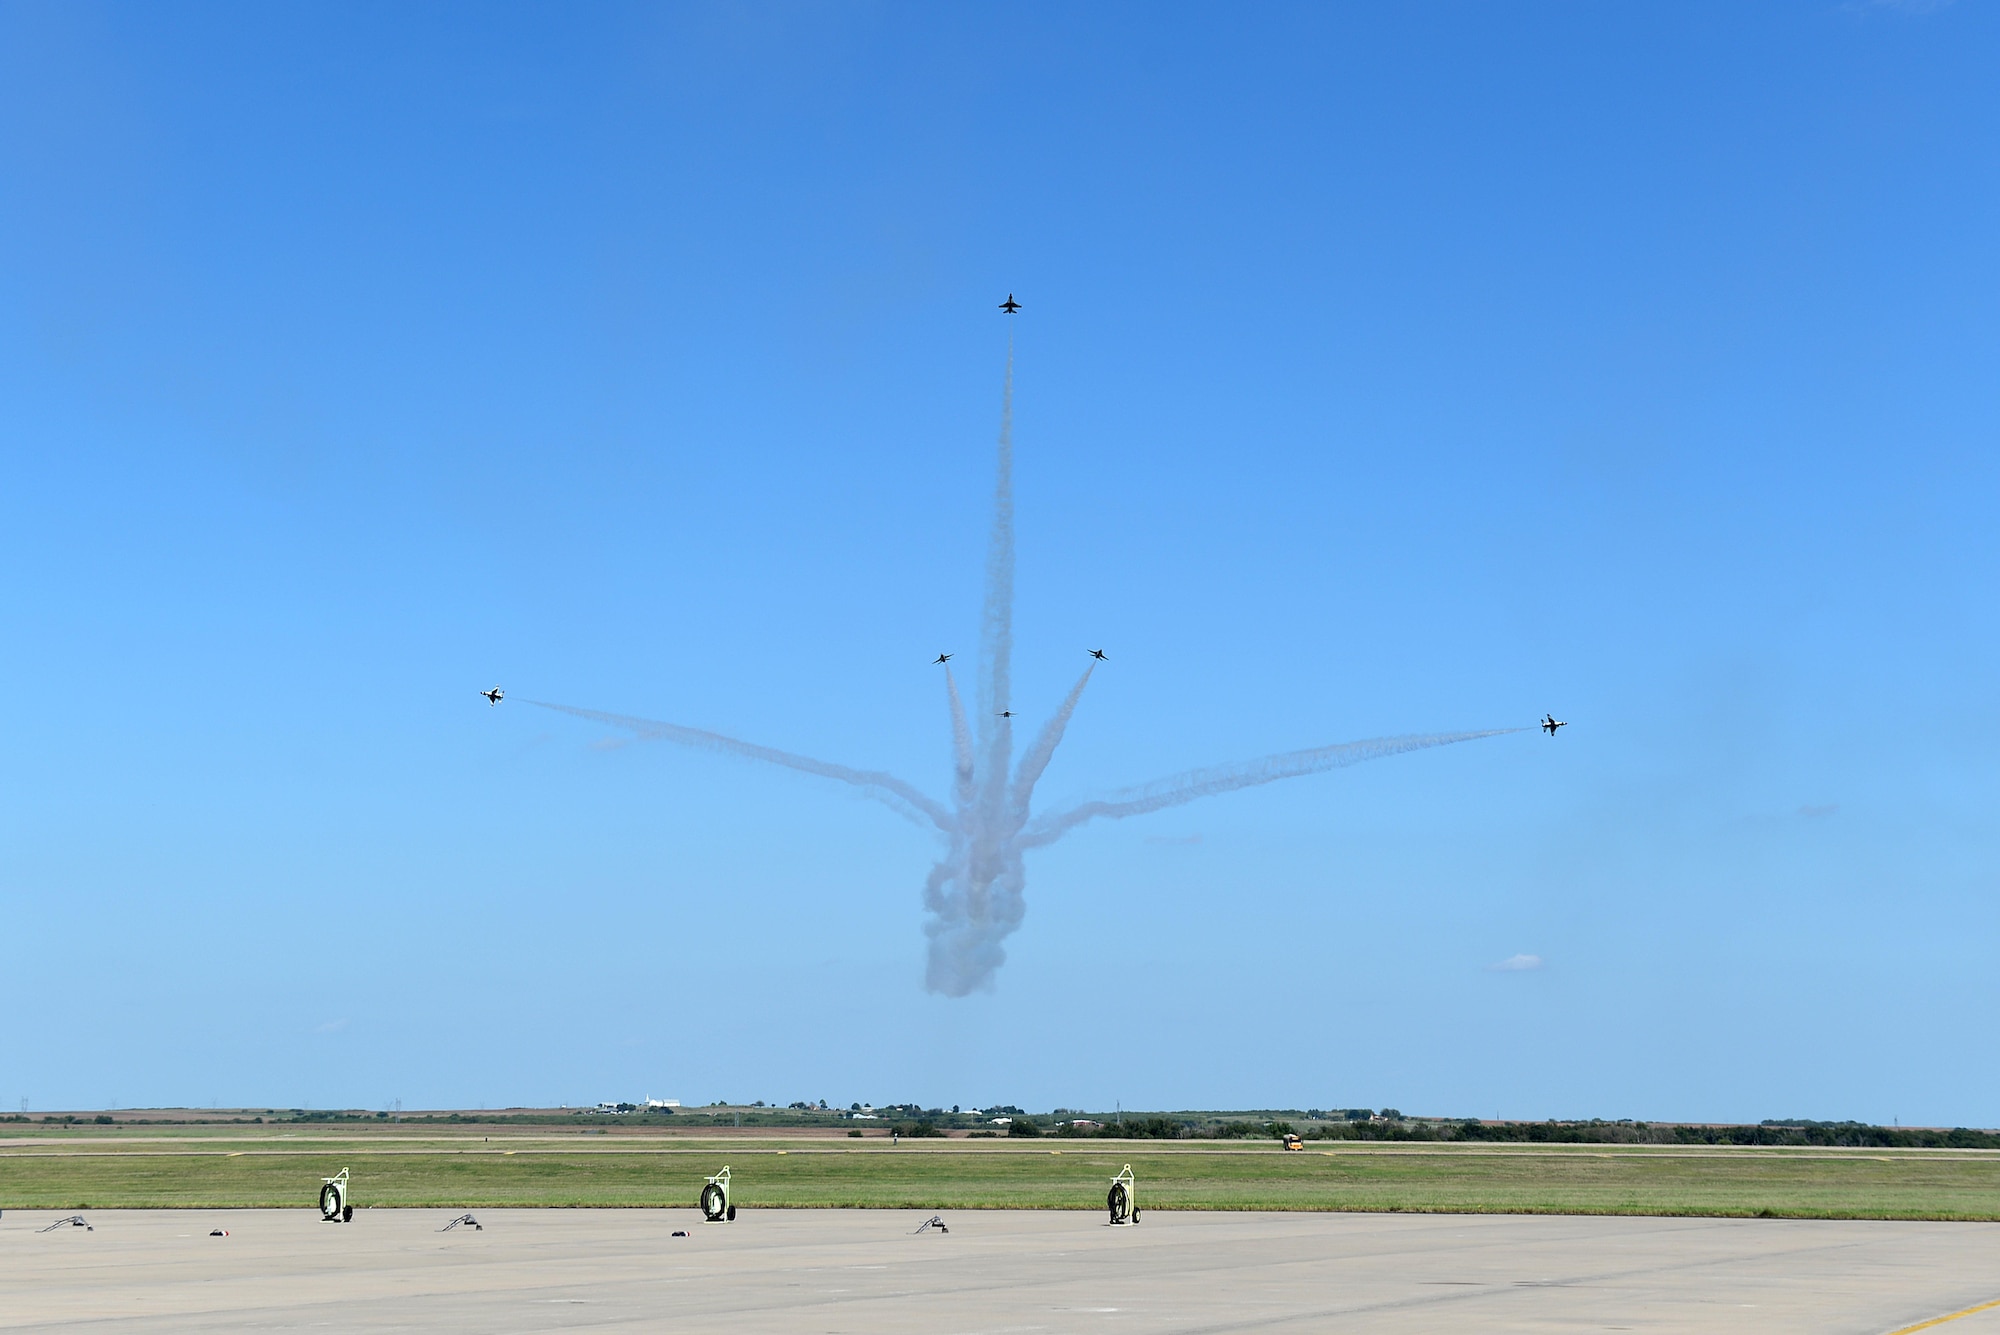 The U.S. Air Force Thunderbirds perform their delta burst formation during the Sheppard Air Force Base, Texas, 75th Anniversary Air Show Celebration, Sept. 17, 2016. The Thunderbirds showcase the skill and precision of the brave aviators, maintenance and support Airmen who deploy abroad to defend our nation and its allies. (U.S. Air Force photo by Senior Airman Kyle E. Gese)